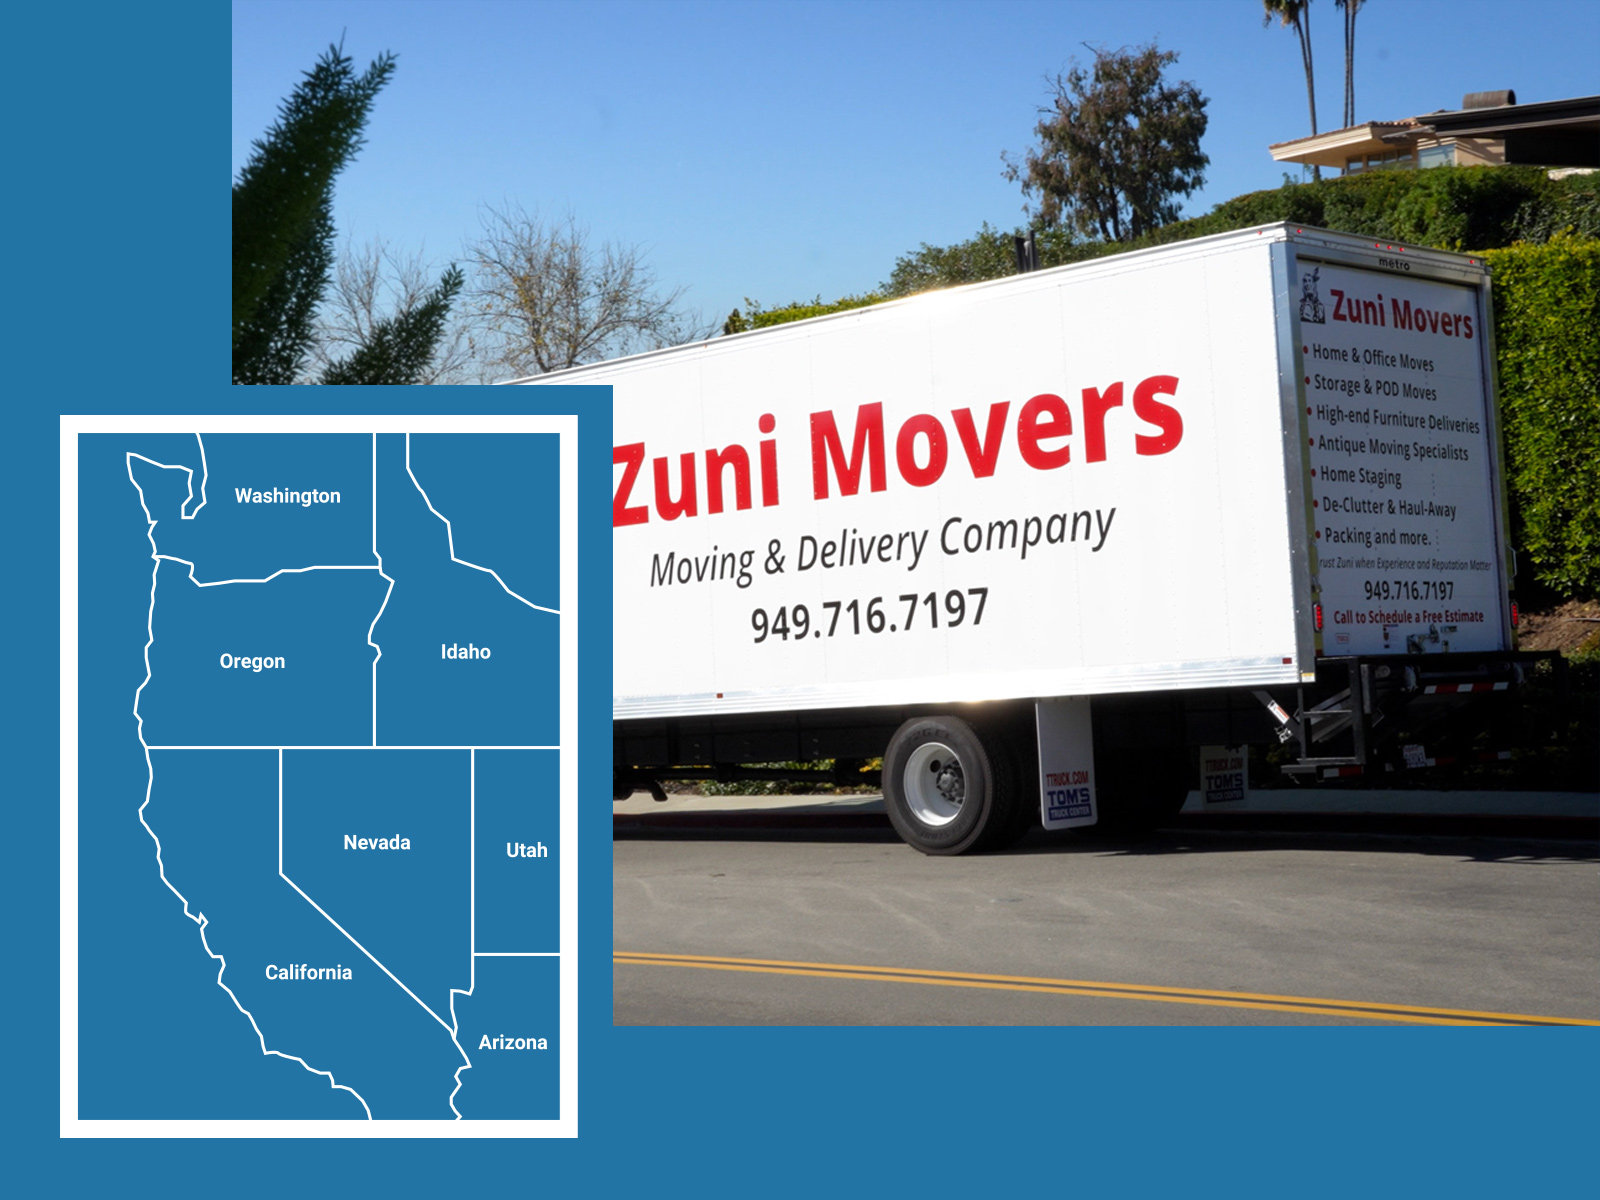 Zuni Movers truck with Map displaying where they move clients to